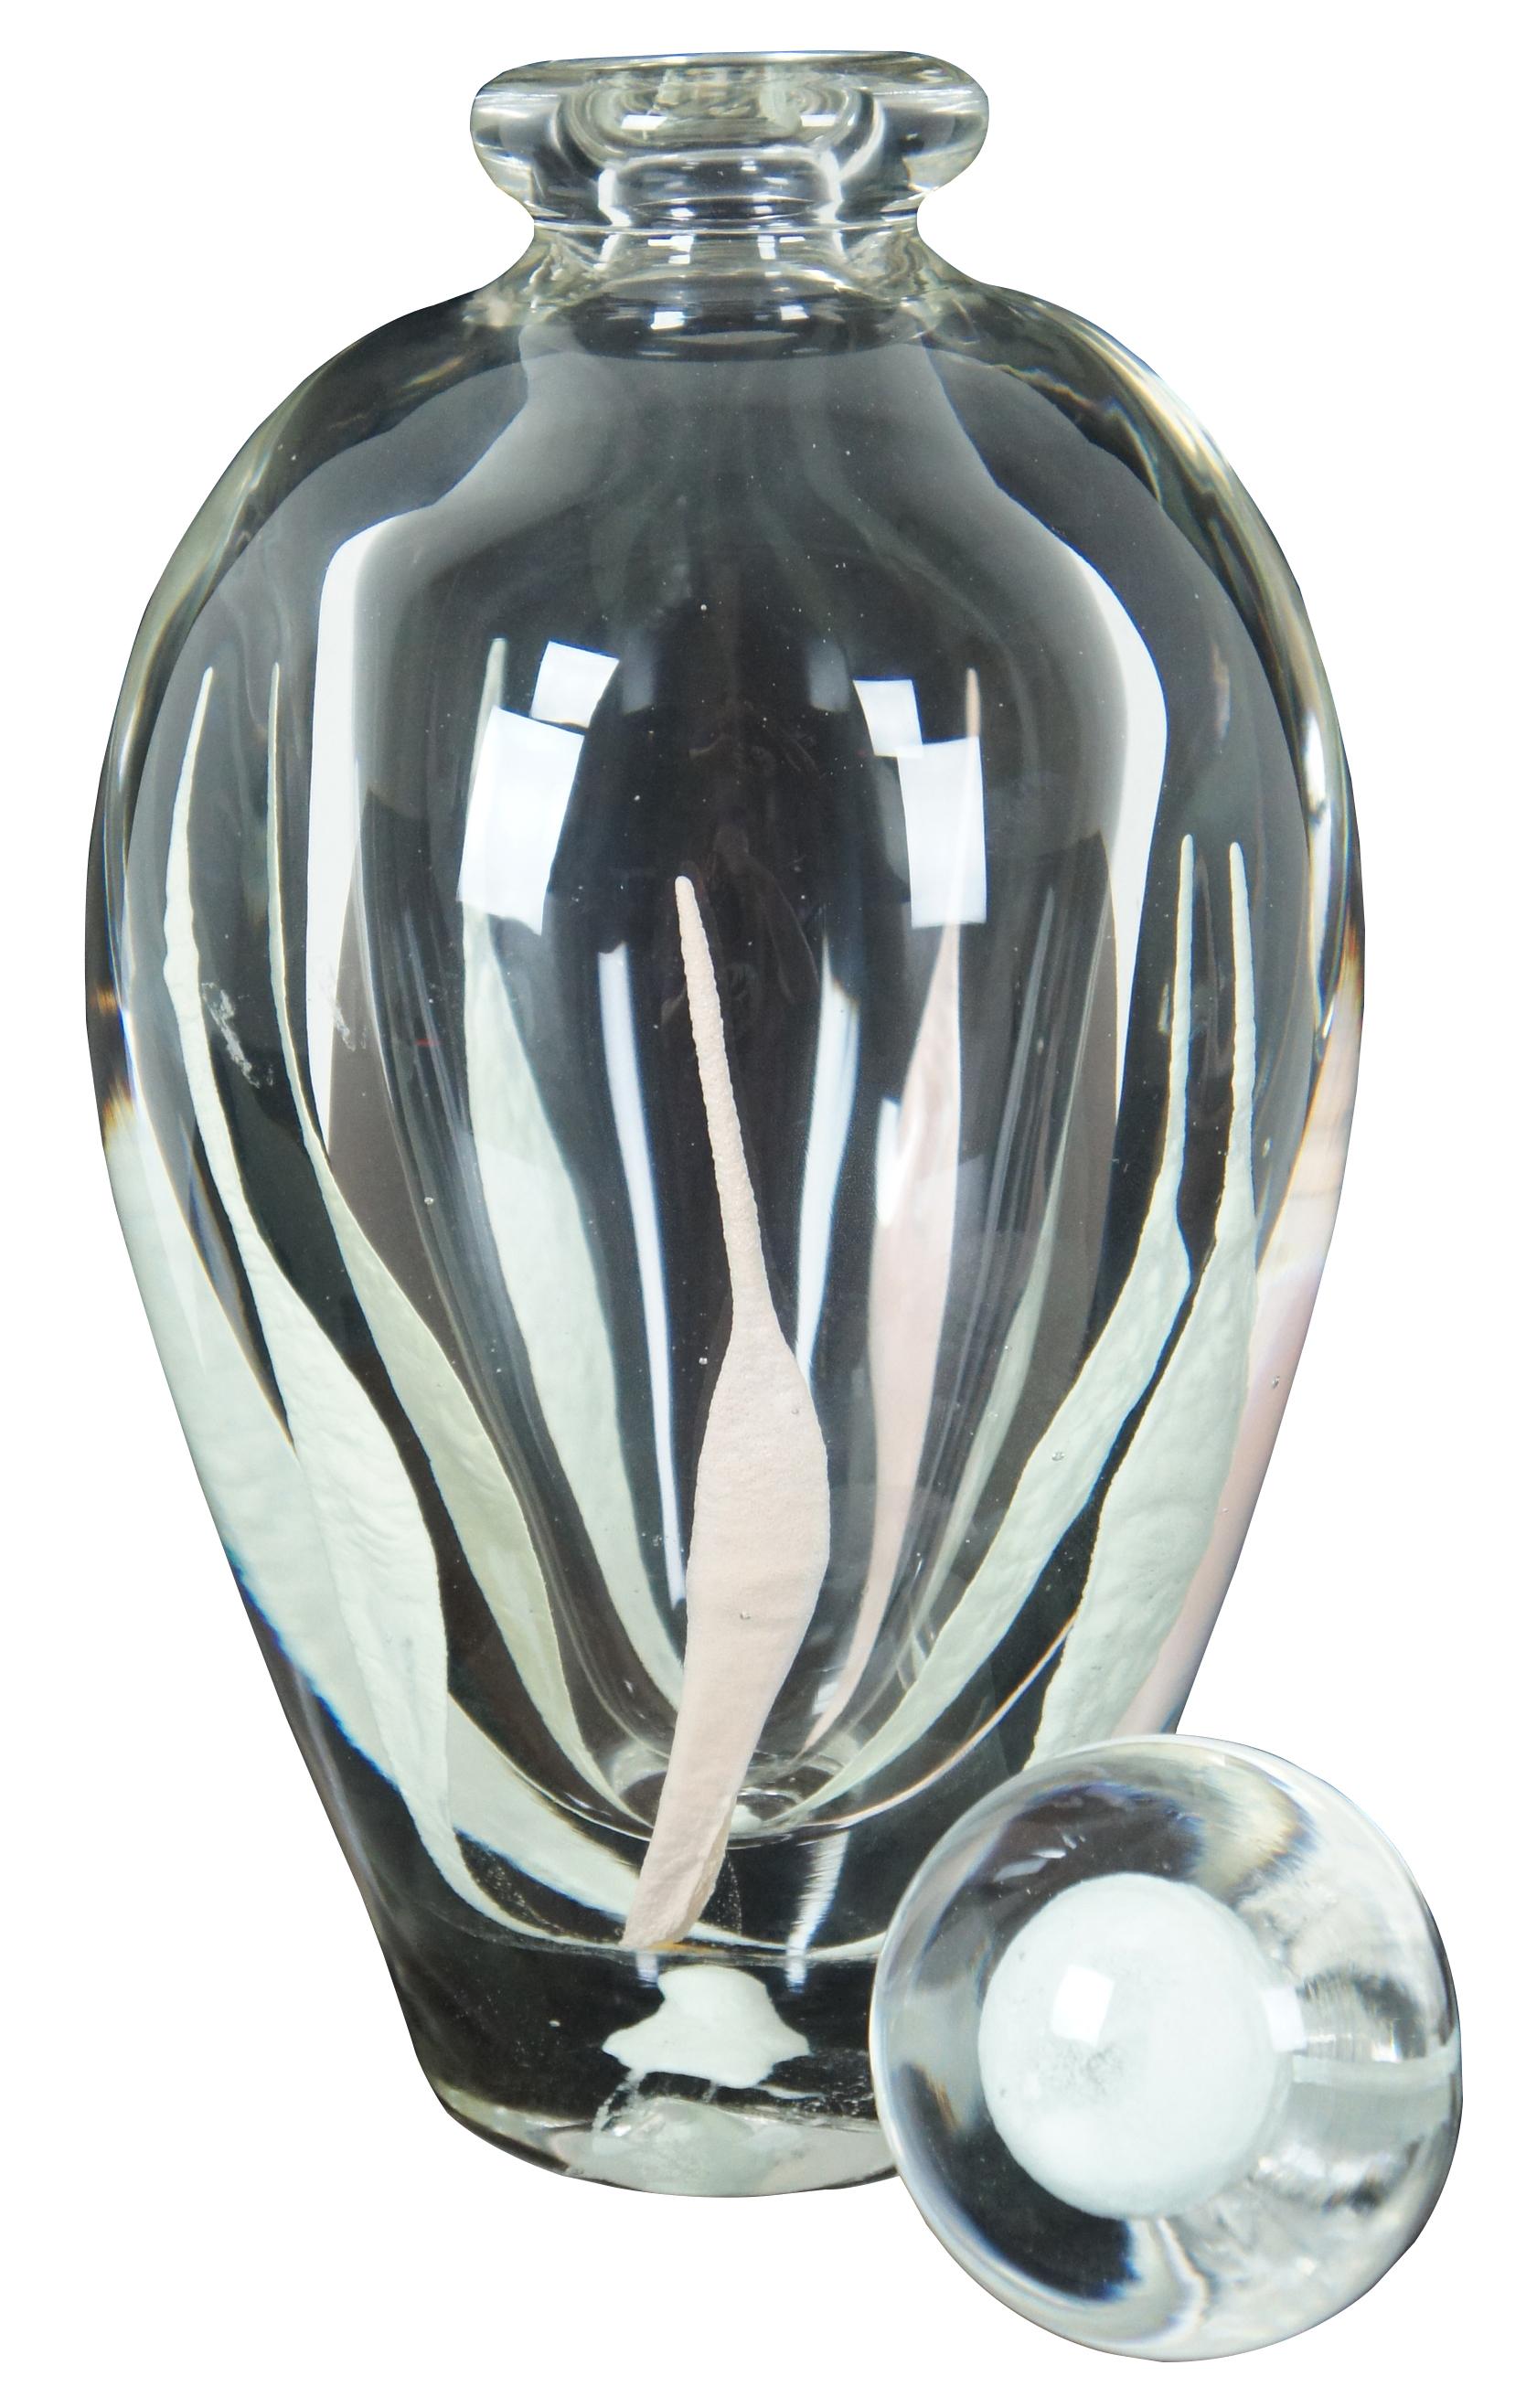 Glow in the dark purfume bottle or vase by JCN. 1943– Born in Antibes, France in 1943, Jean Claude Novaro is a world-renowned glassblower. His works, once small animals being sold to tourists, are now in galleries, museums, and private collections